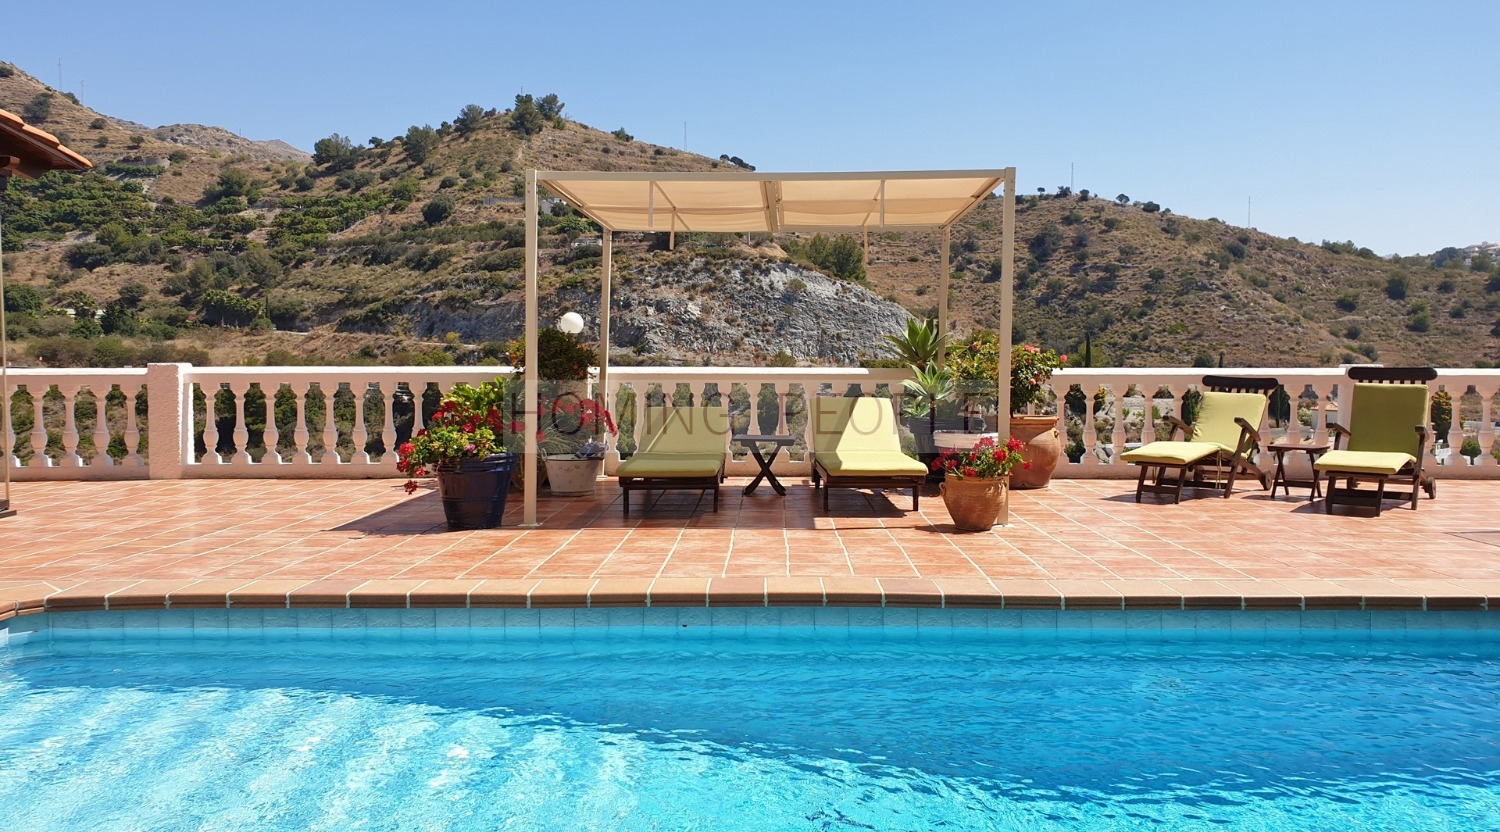 Villa with pool and sea views, located in very sought-after urbanisation